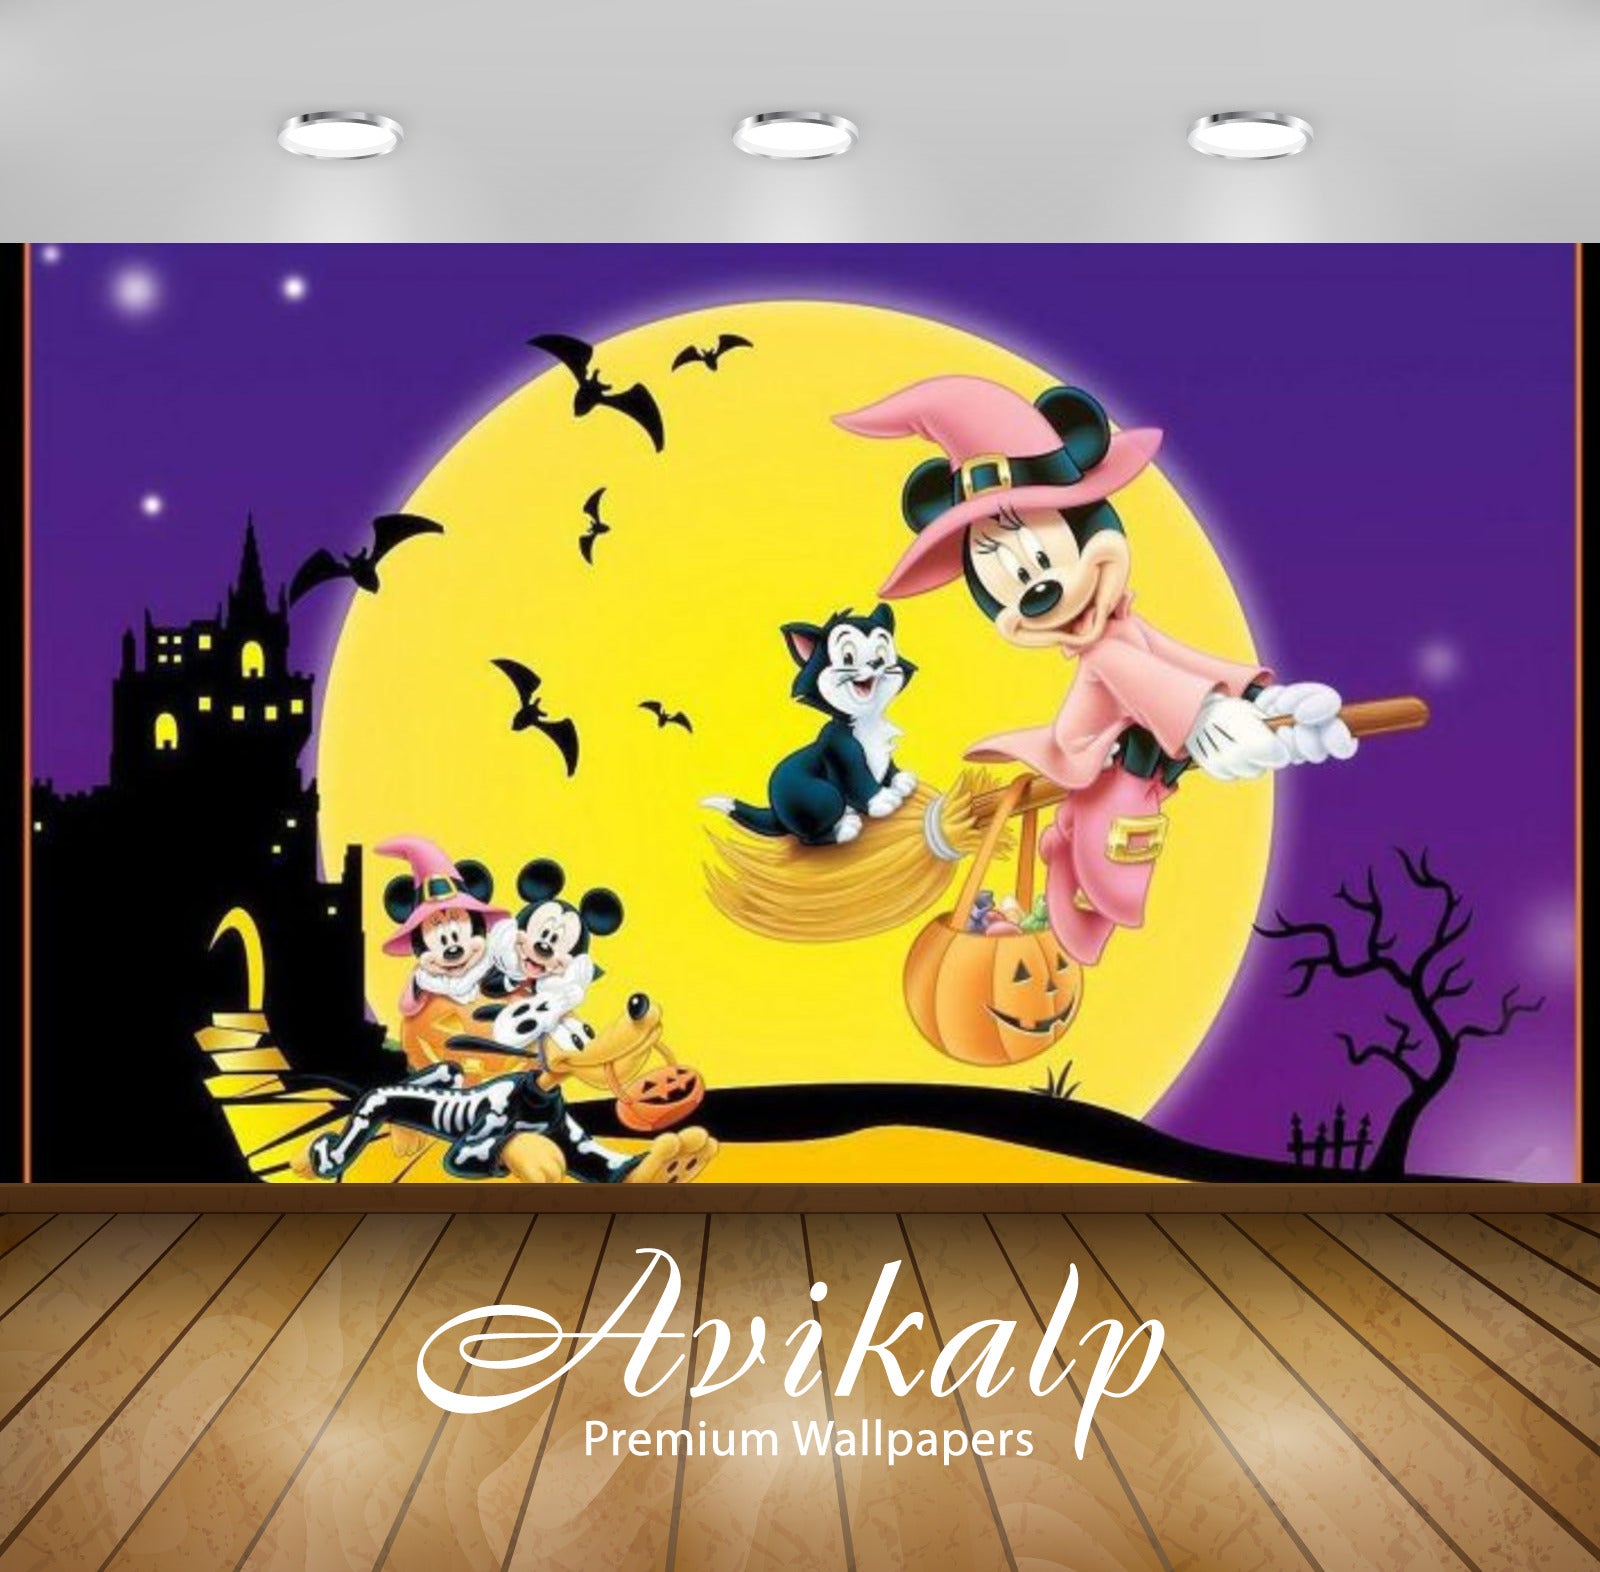 Avikalp Exclusive Awi2083 Halloween Mickey Mouse   Full HD Wallpapers for Living room, Hall, Kids Ro